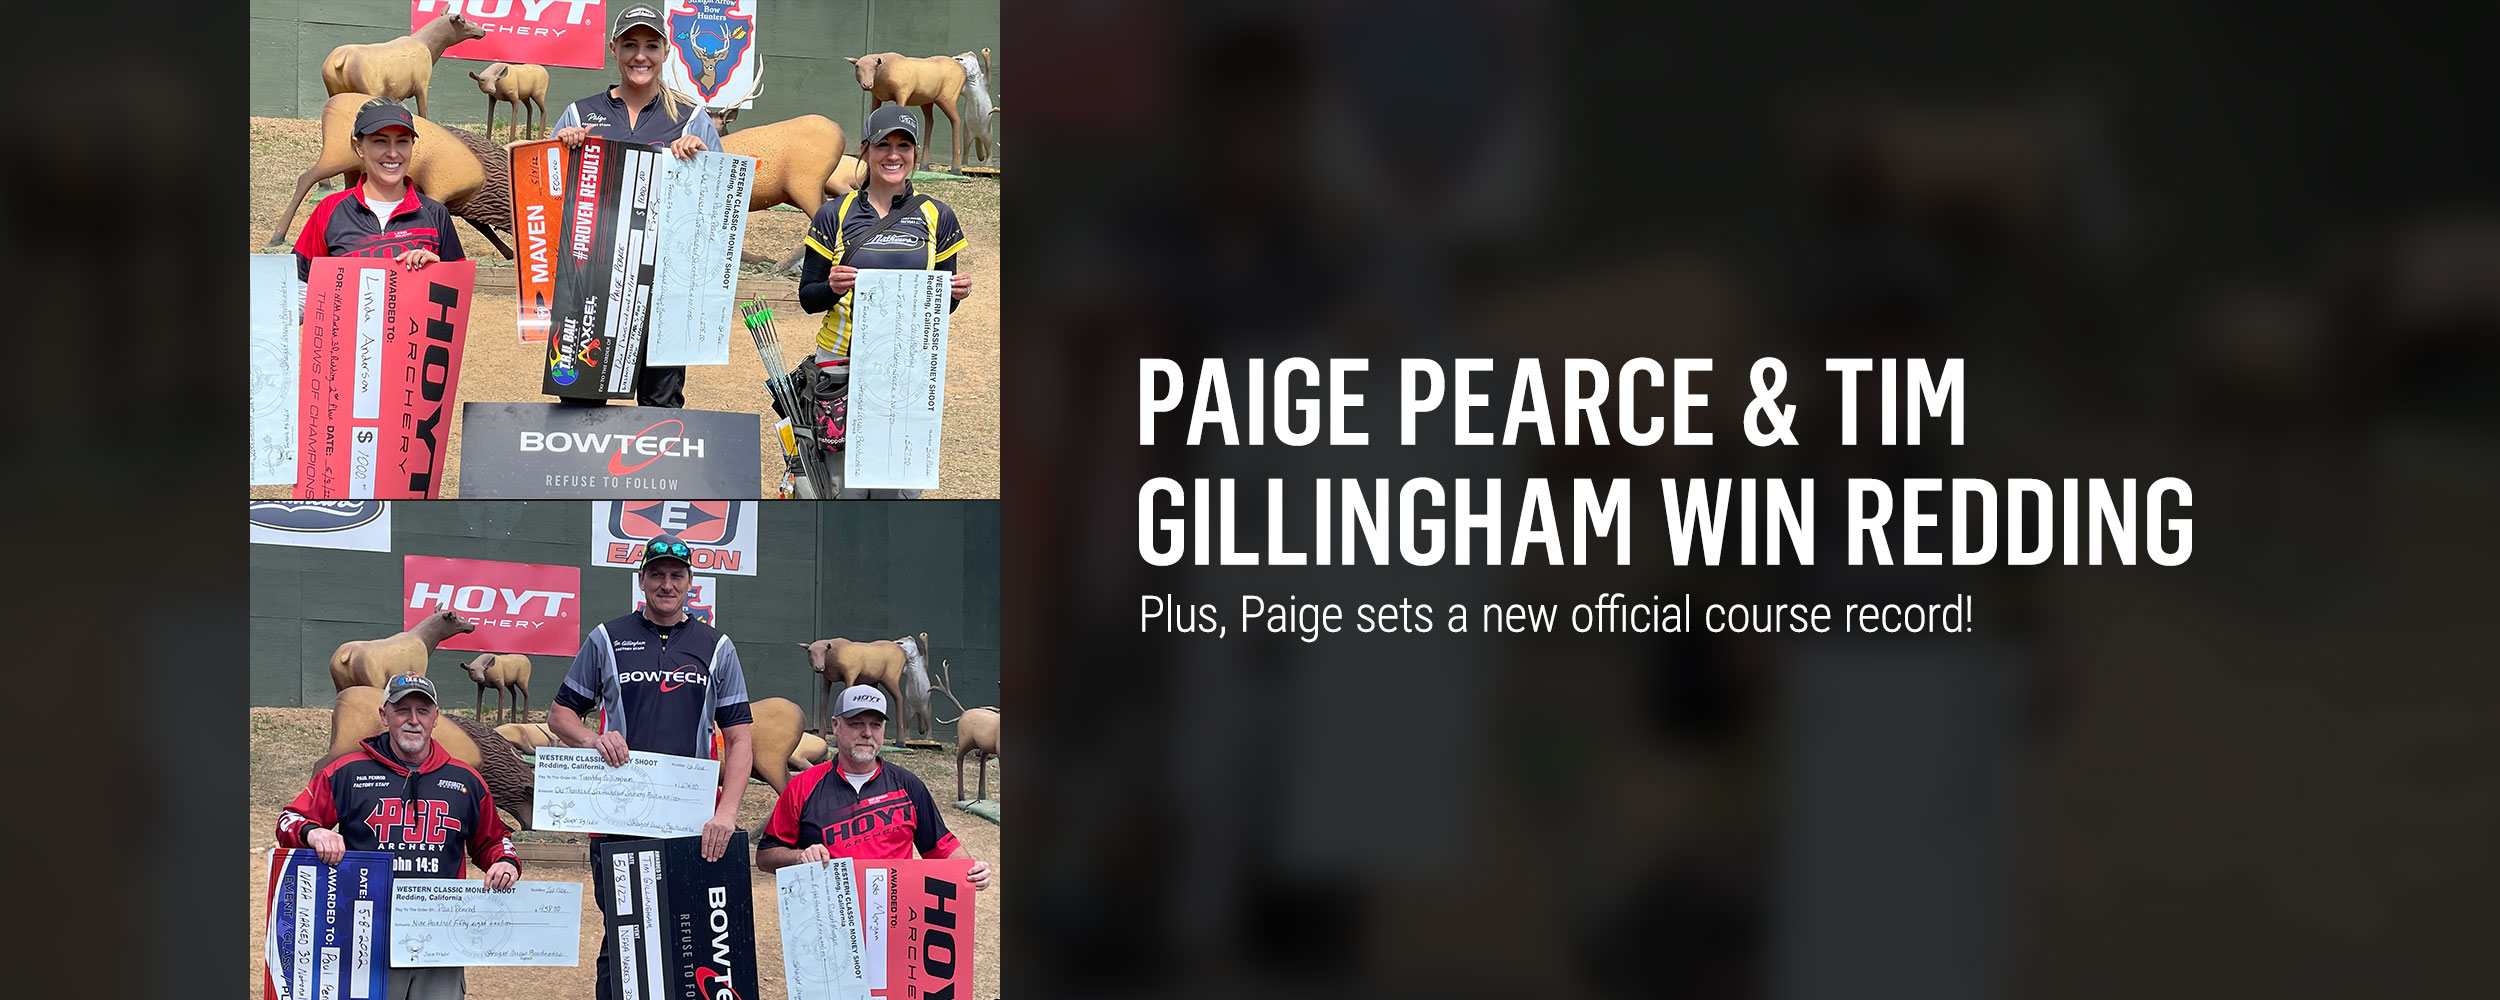 Paige Pearce and Tim Gillingham win Redding